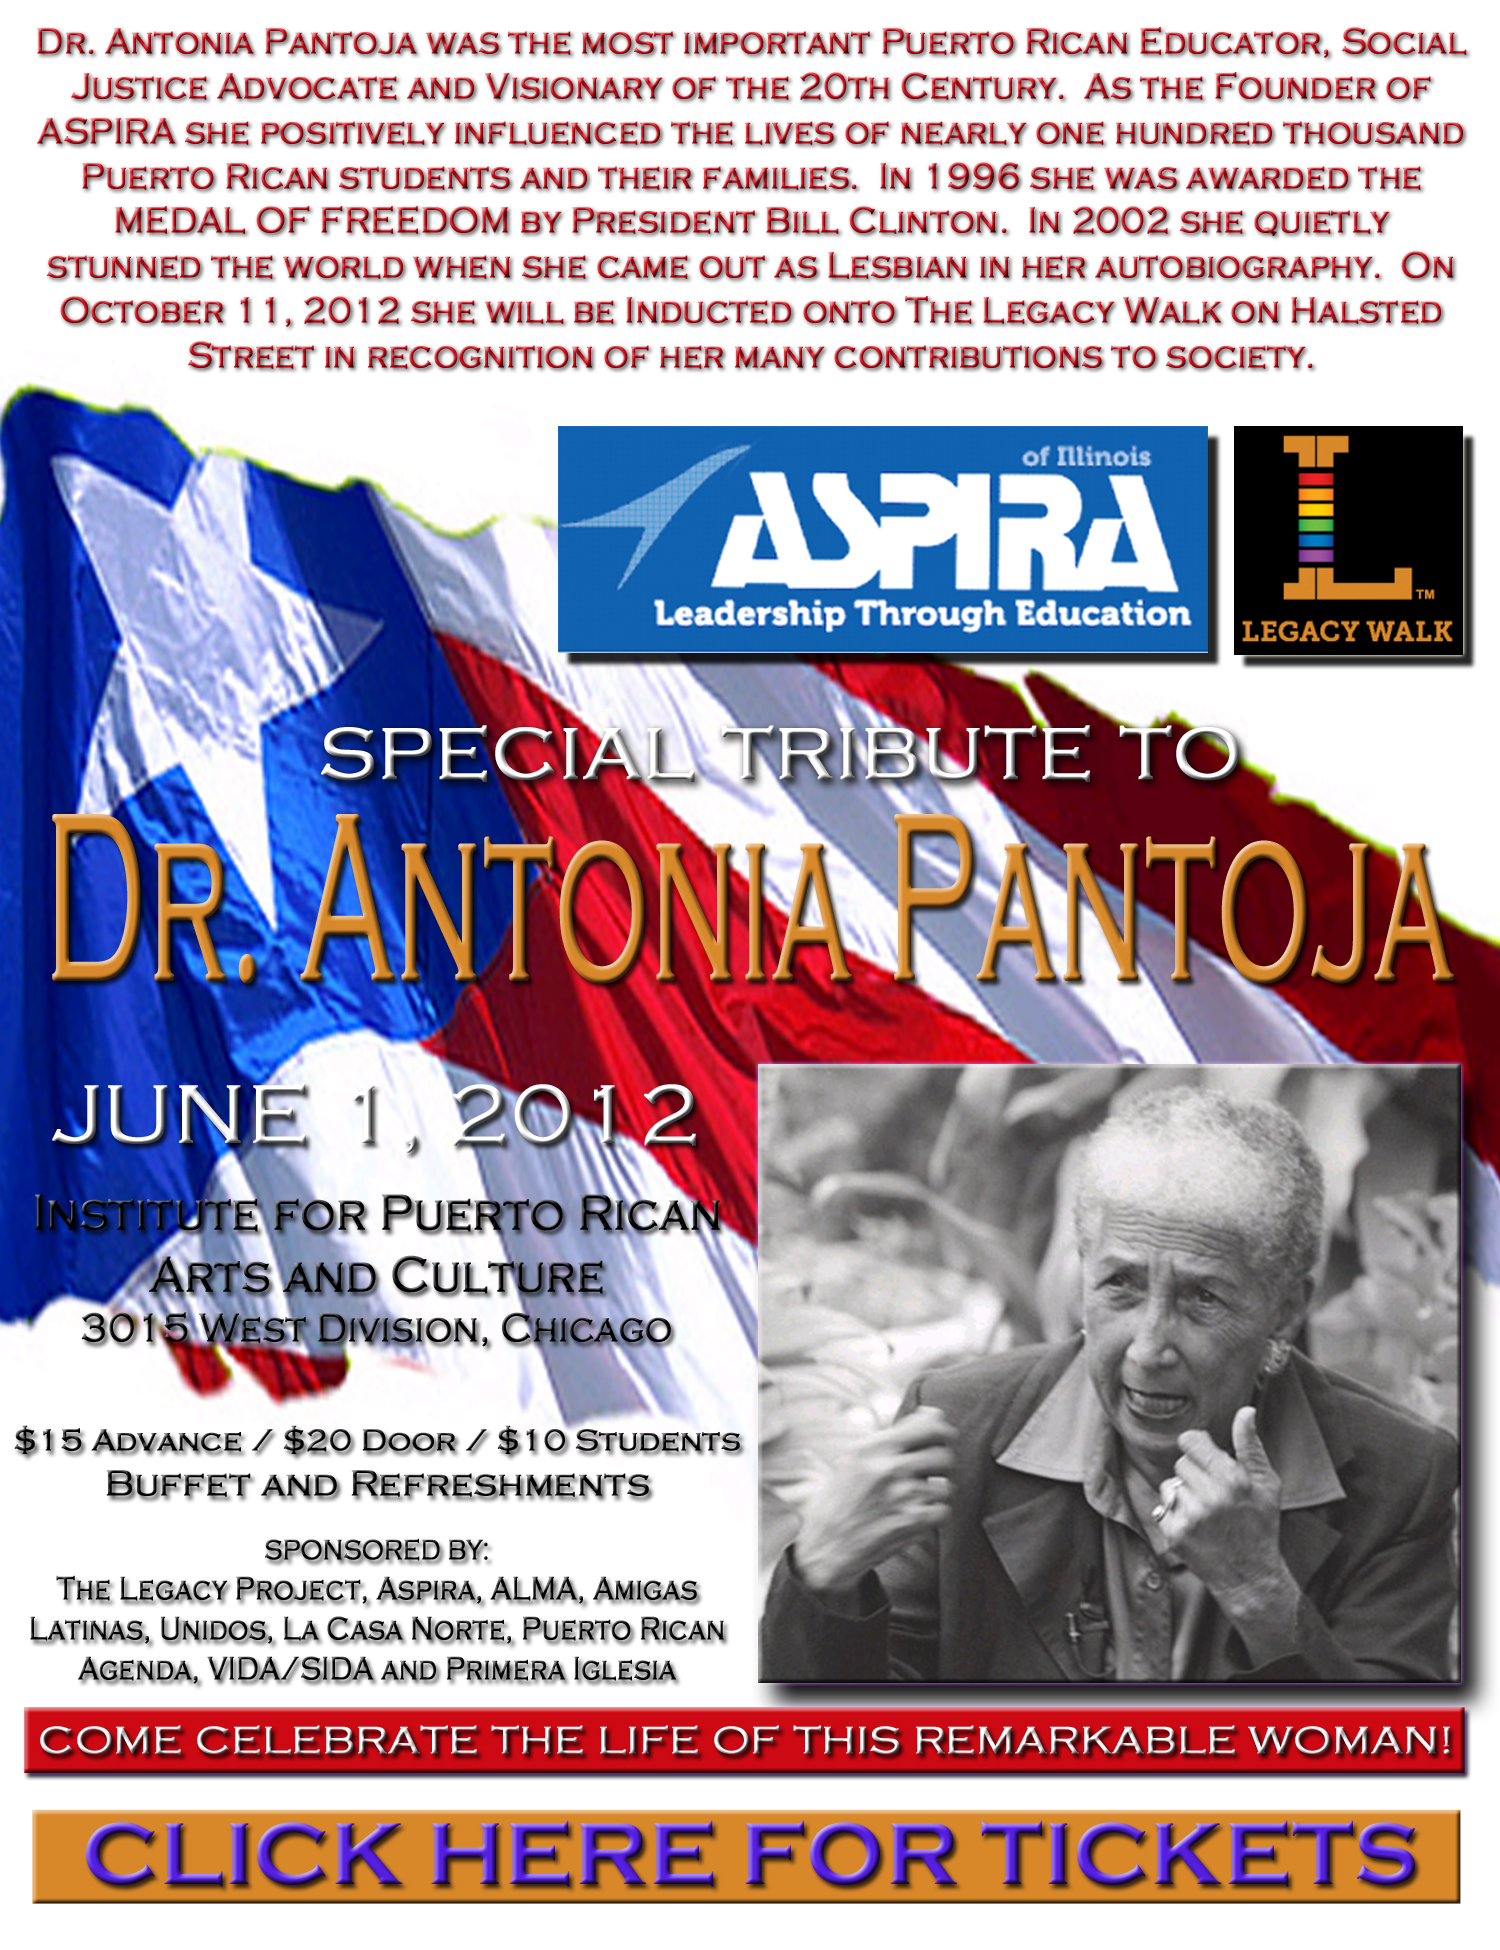 LEGACY PROJECT PRESENTS A Special Tribute to Dra. Antonia Pantoja 2012